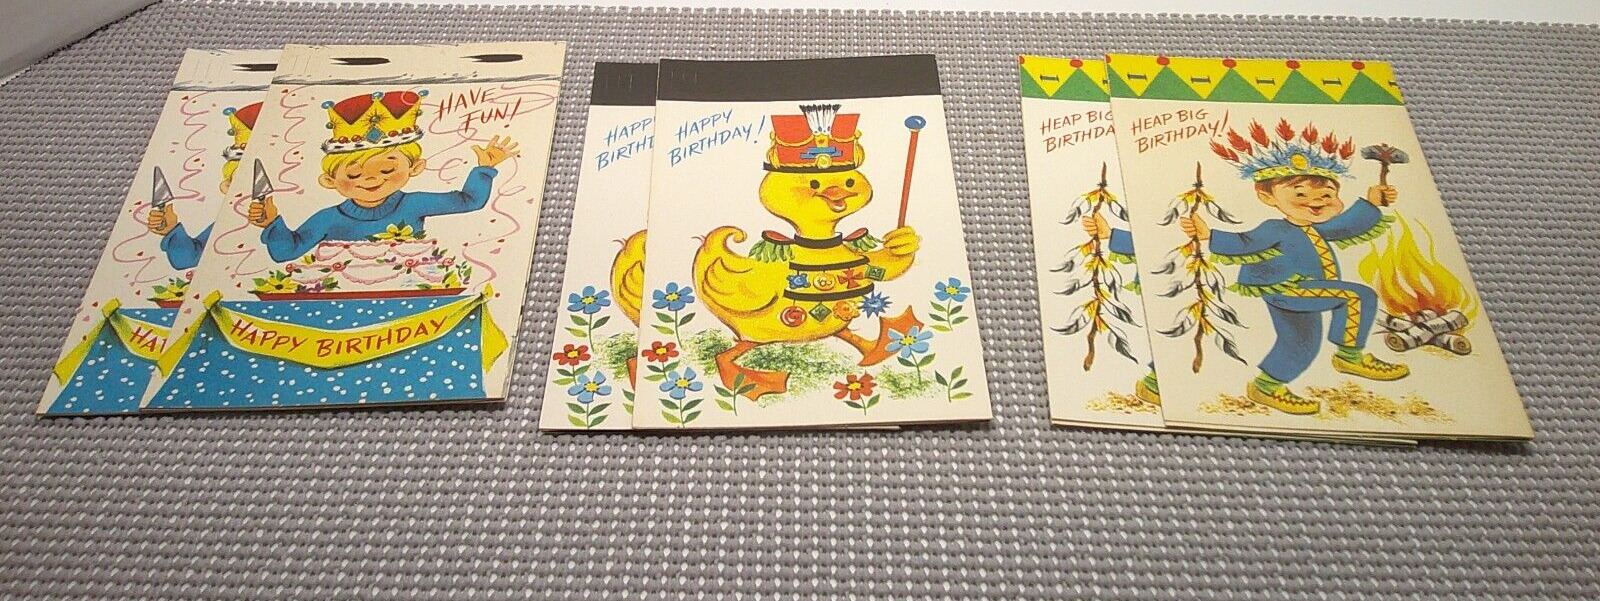 Lot of 6 Vintage Put on your Crown Birthday Cards Rare Scrapbooking, Crafting